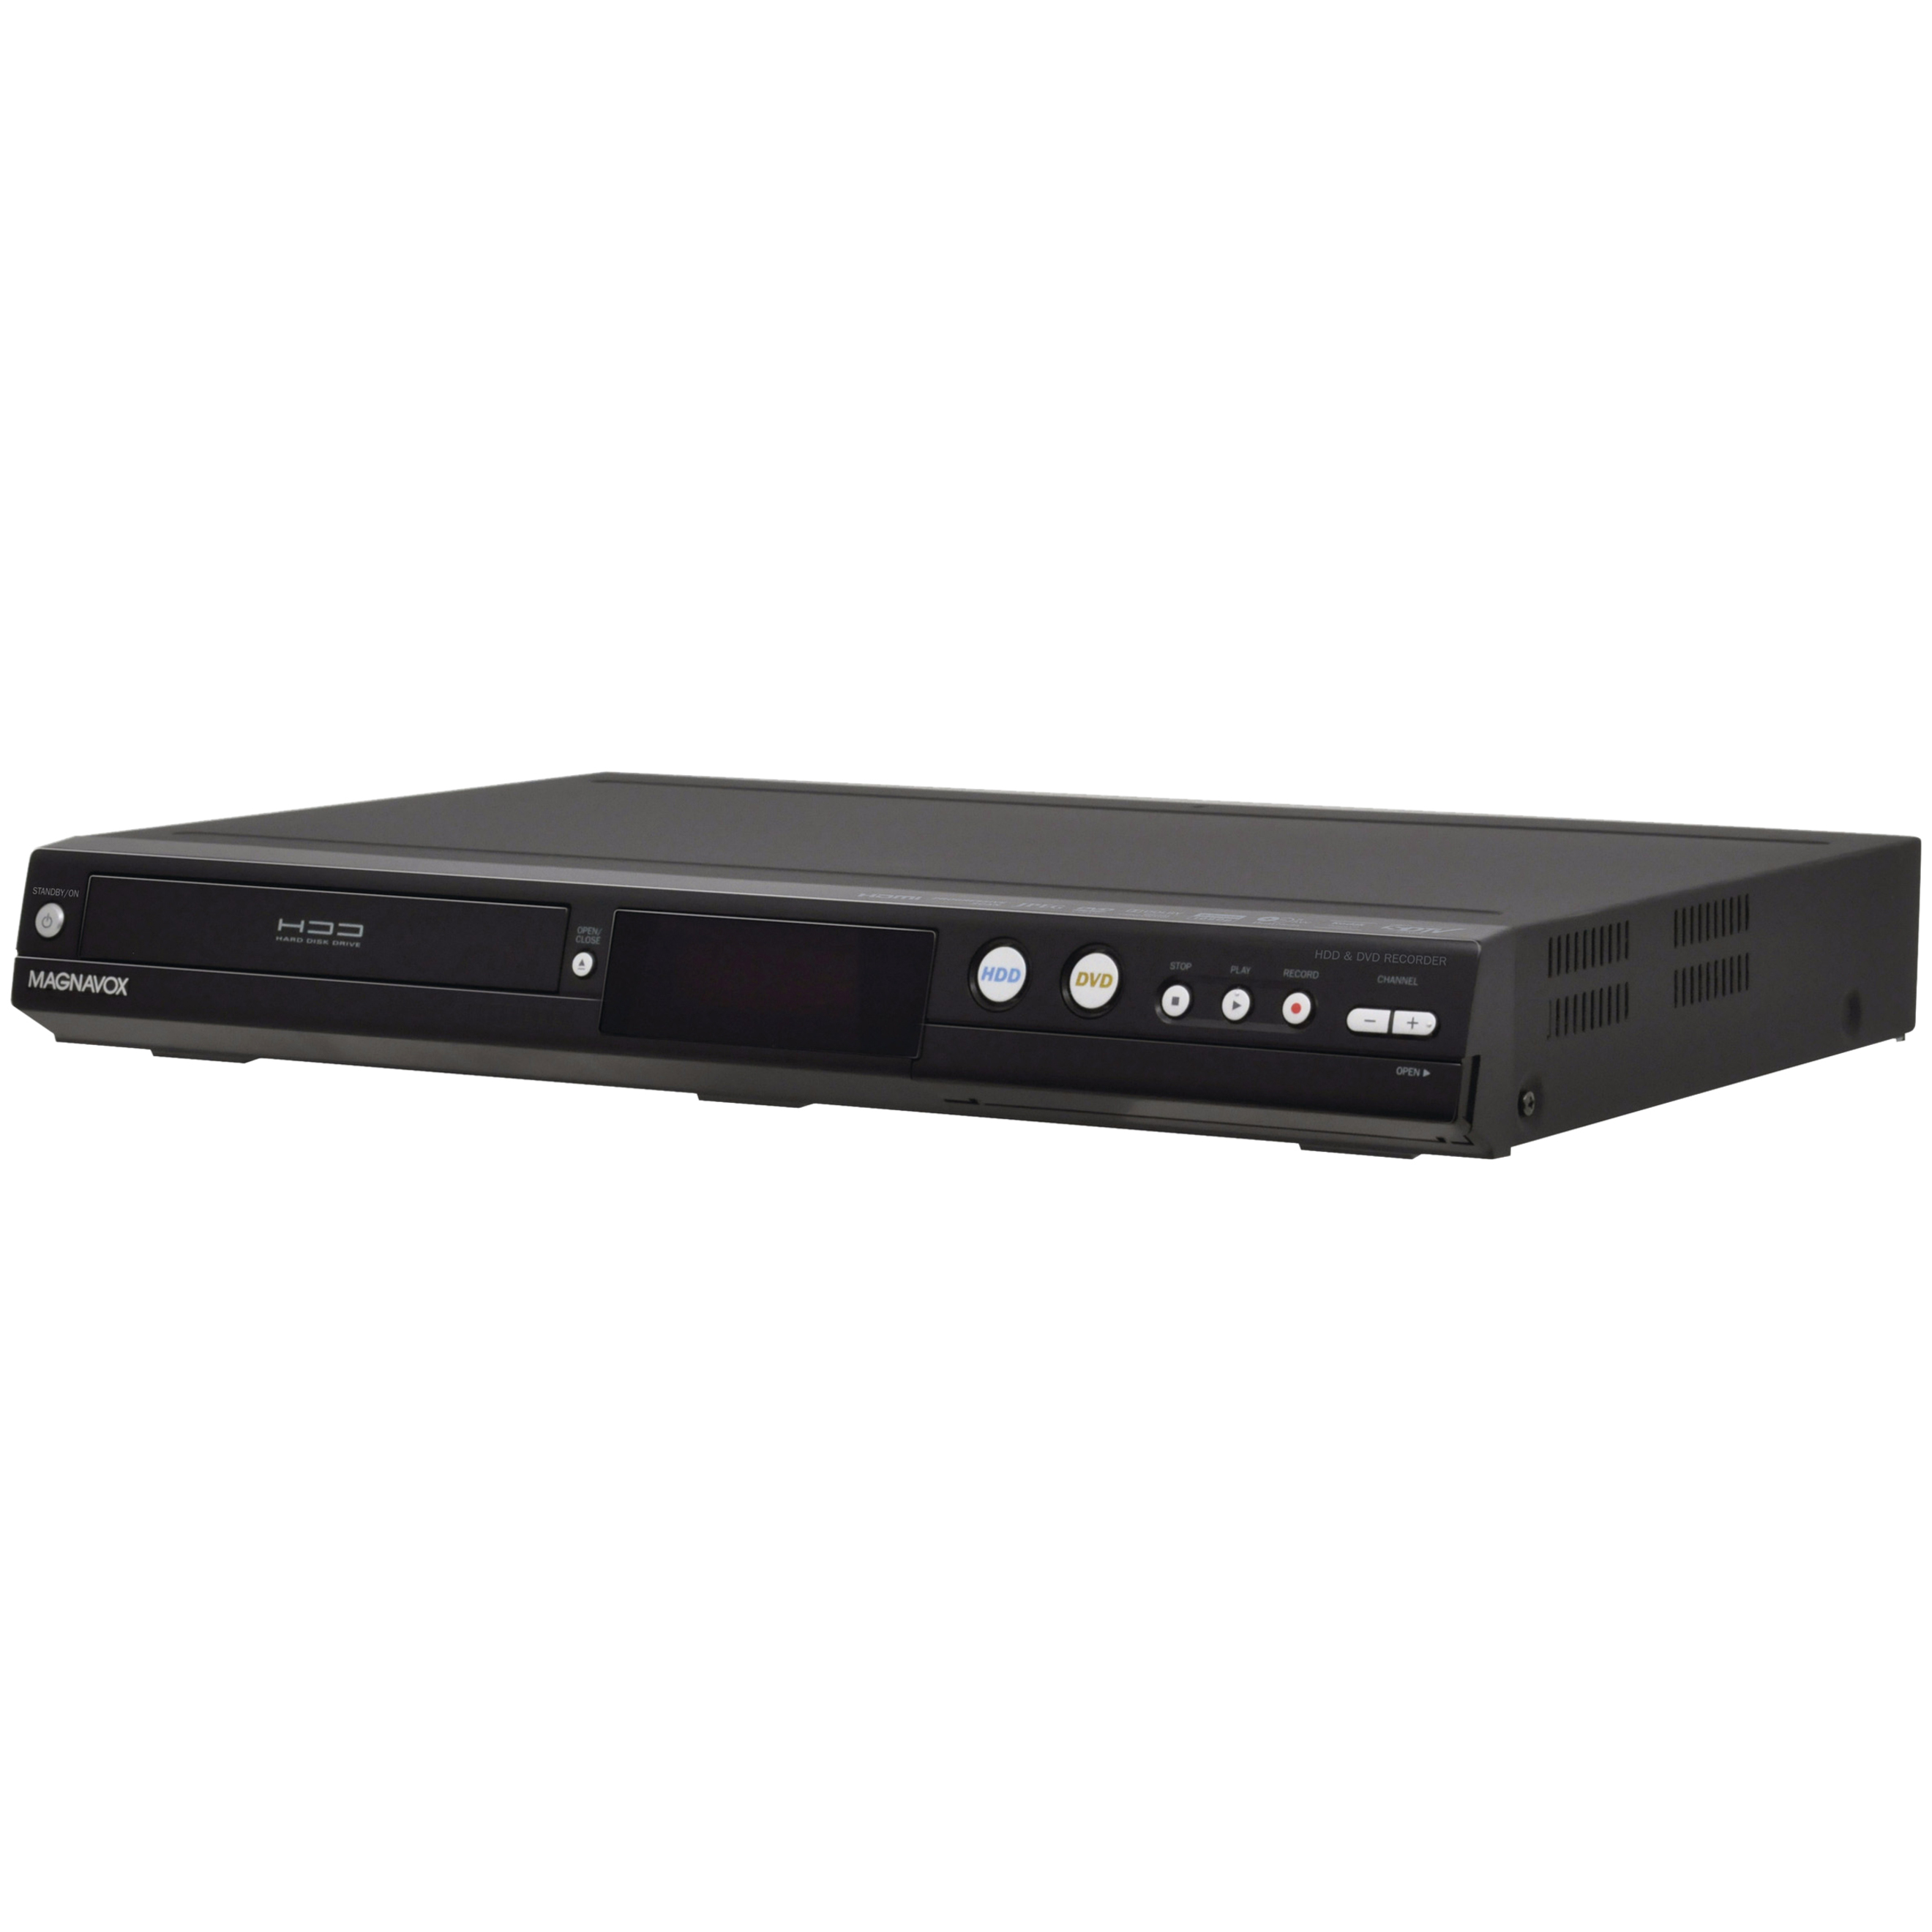 Magnavox MDR535H 1 Disc(s) DVD Player/Recorder, 1080p, 500 GB HDD, Black (New) - image 2 of 4